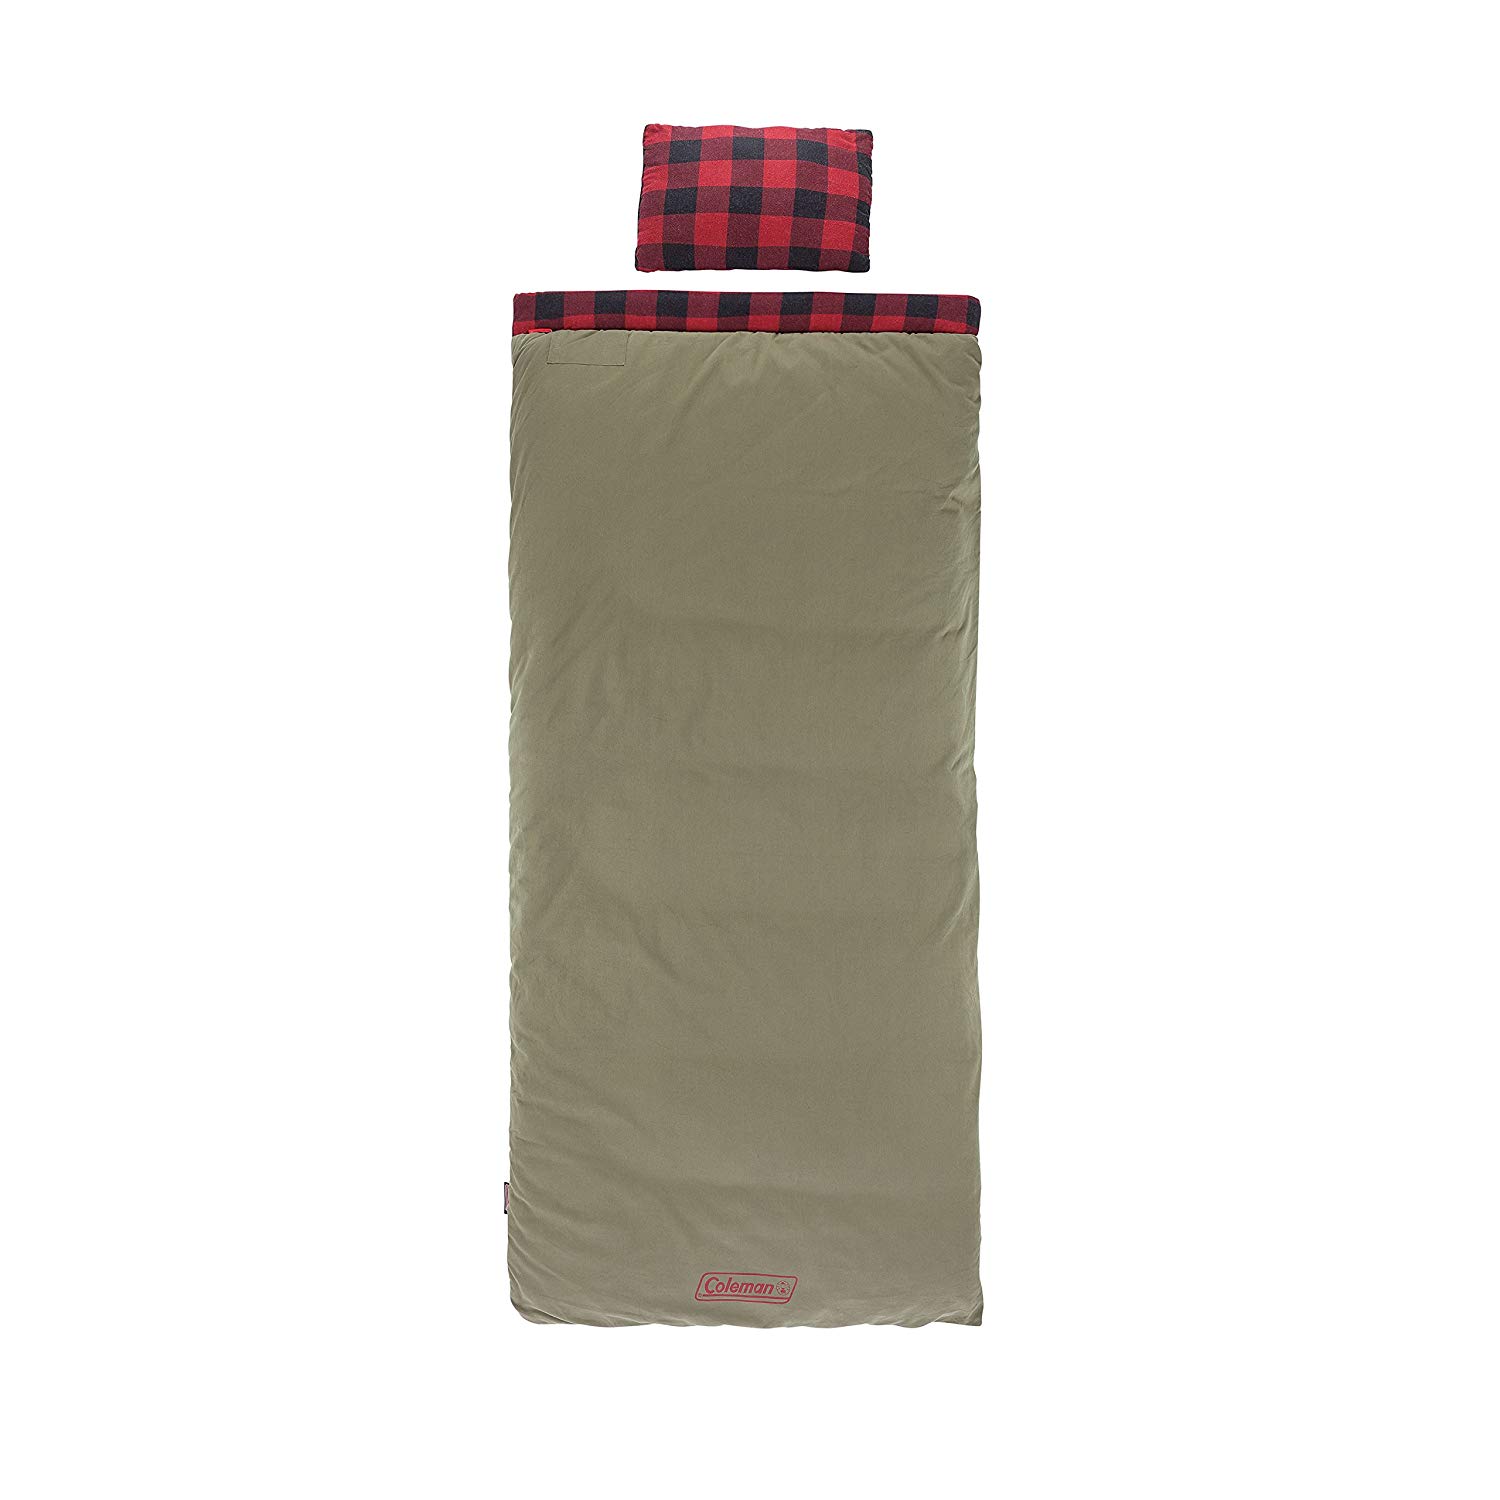 An image related to Coleman Big Game 2000030093 Men's Sub Zero Degree Flannel Sleeping Bag